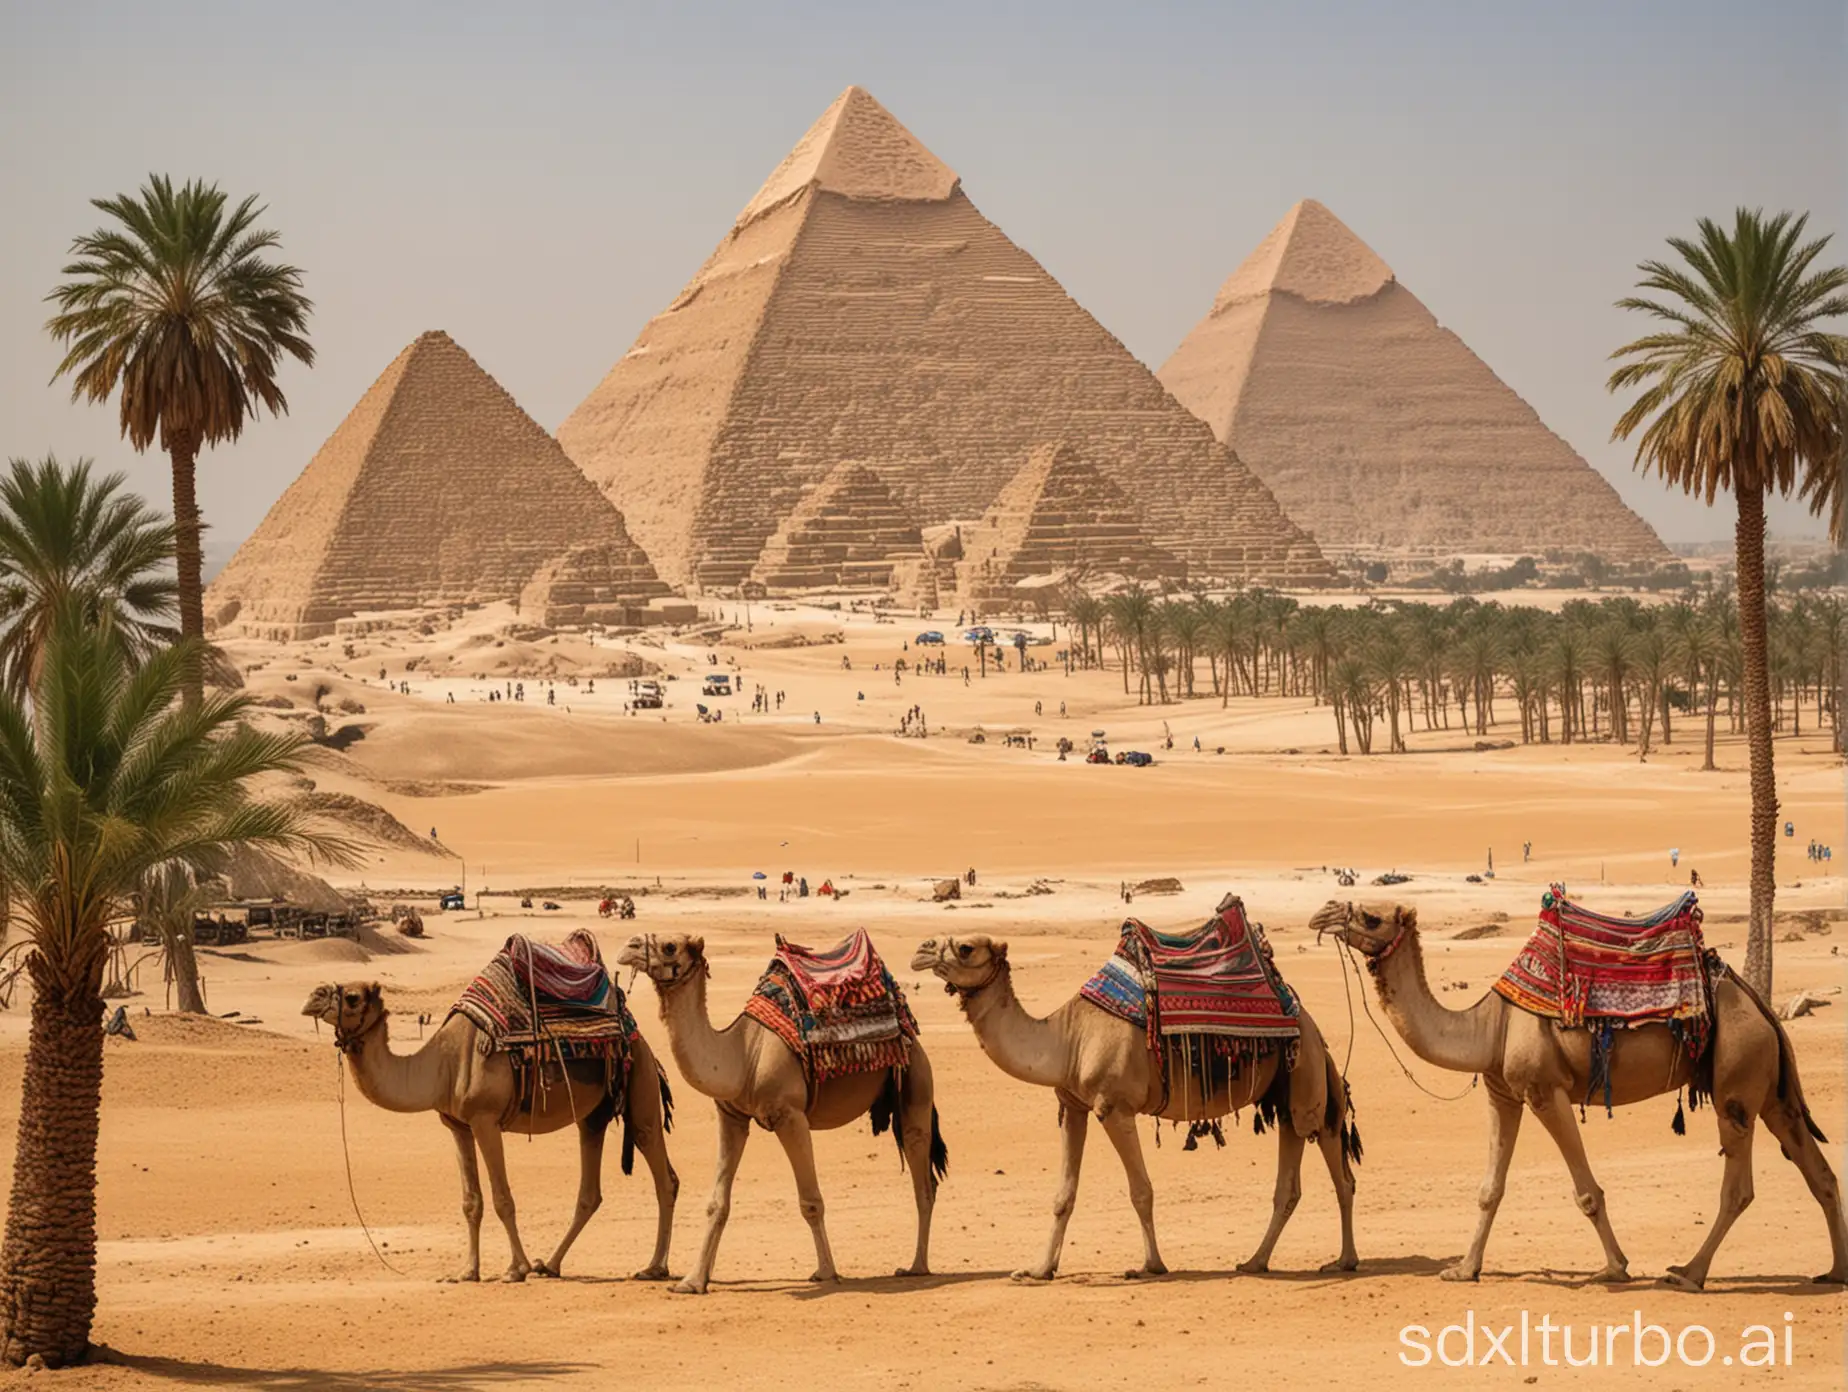 Background of the pyramids of Giza, in the foreground an oasis with palm trees and a camel caravan